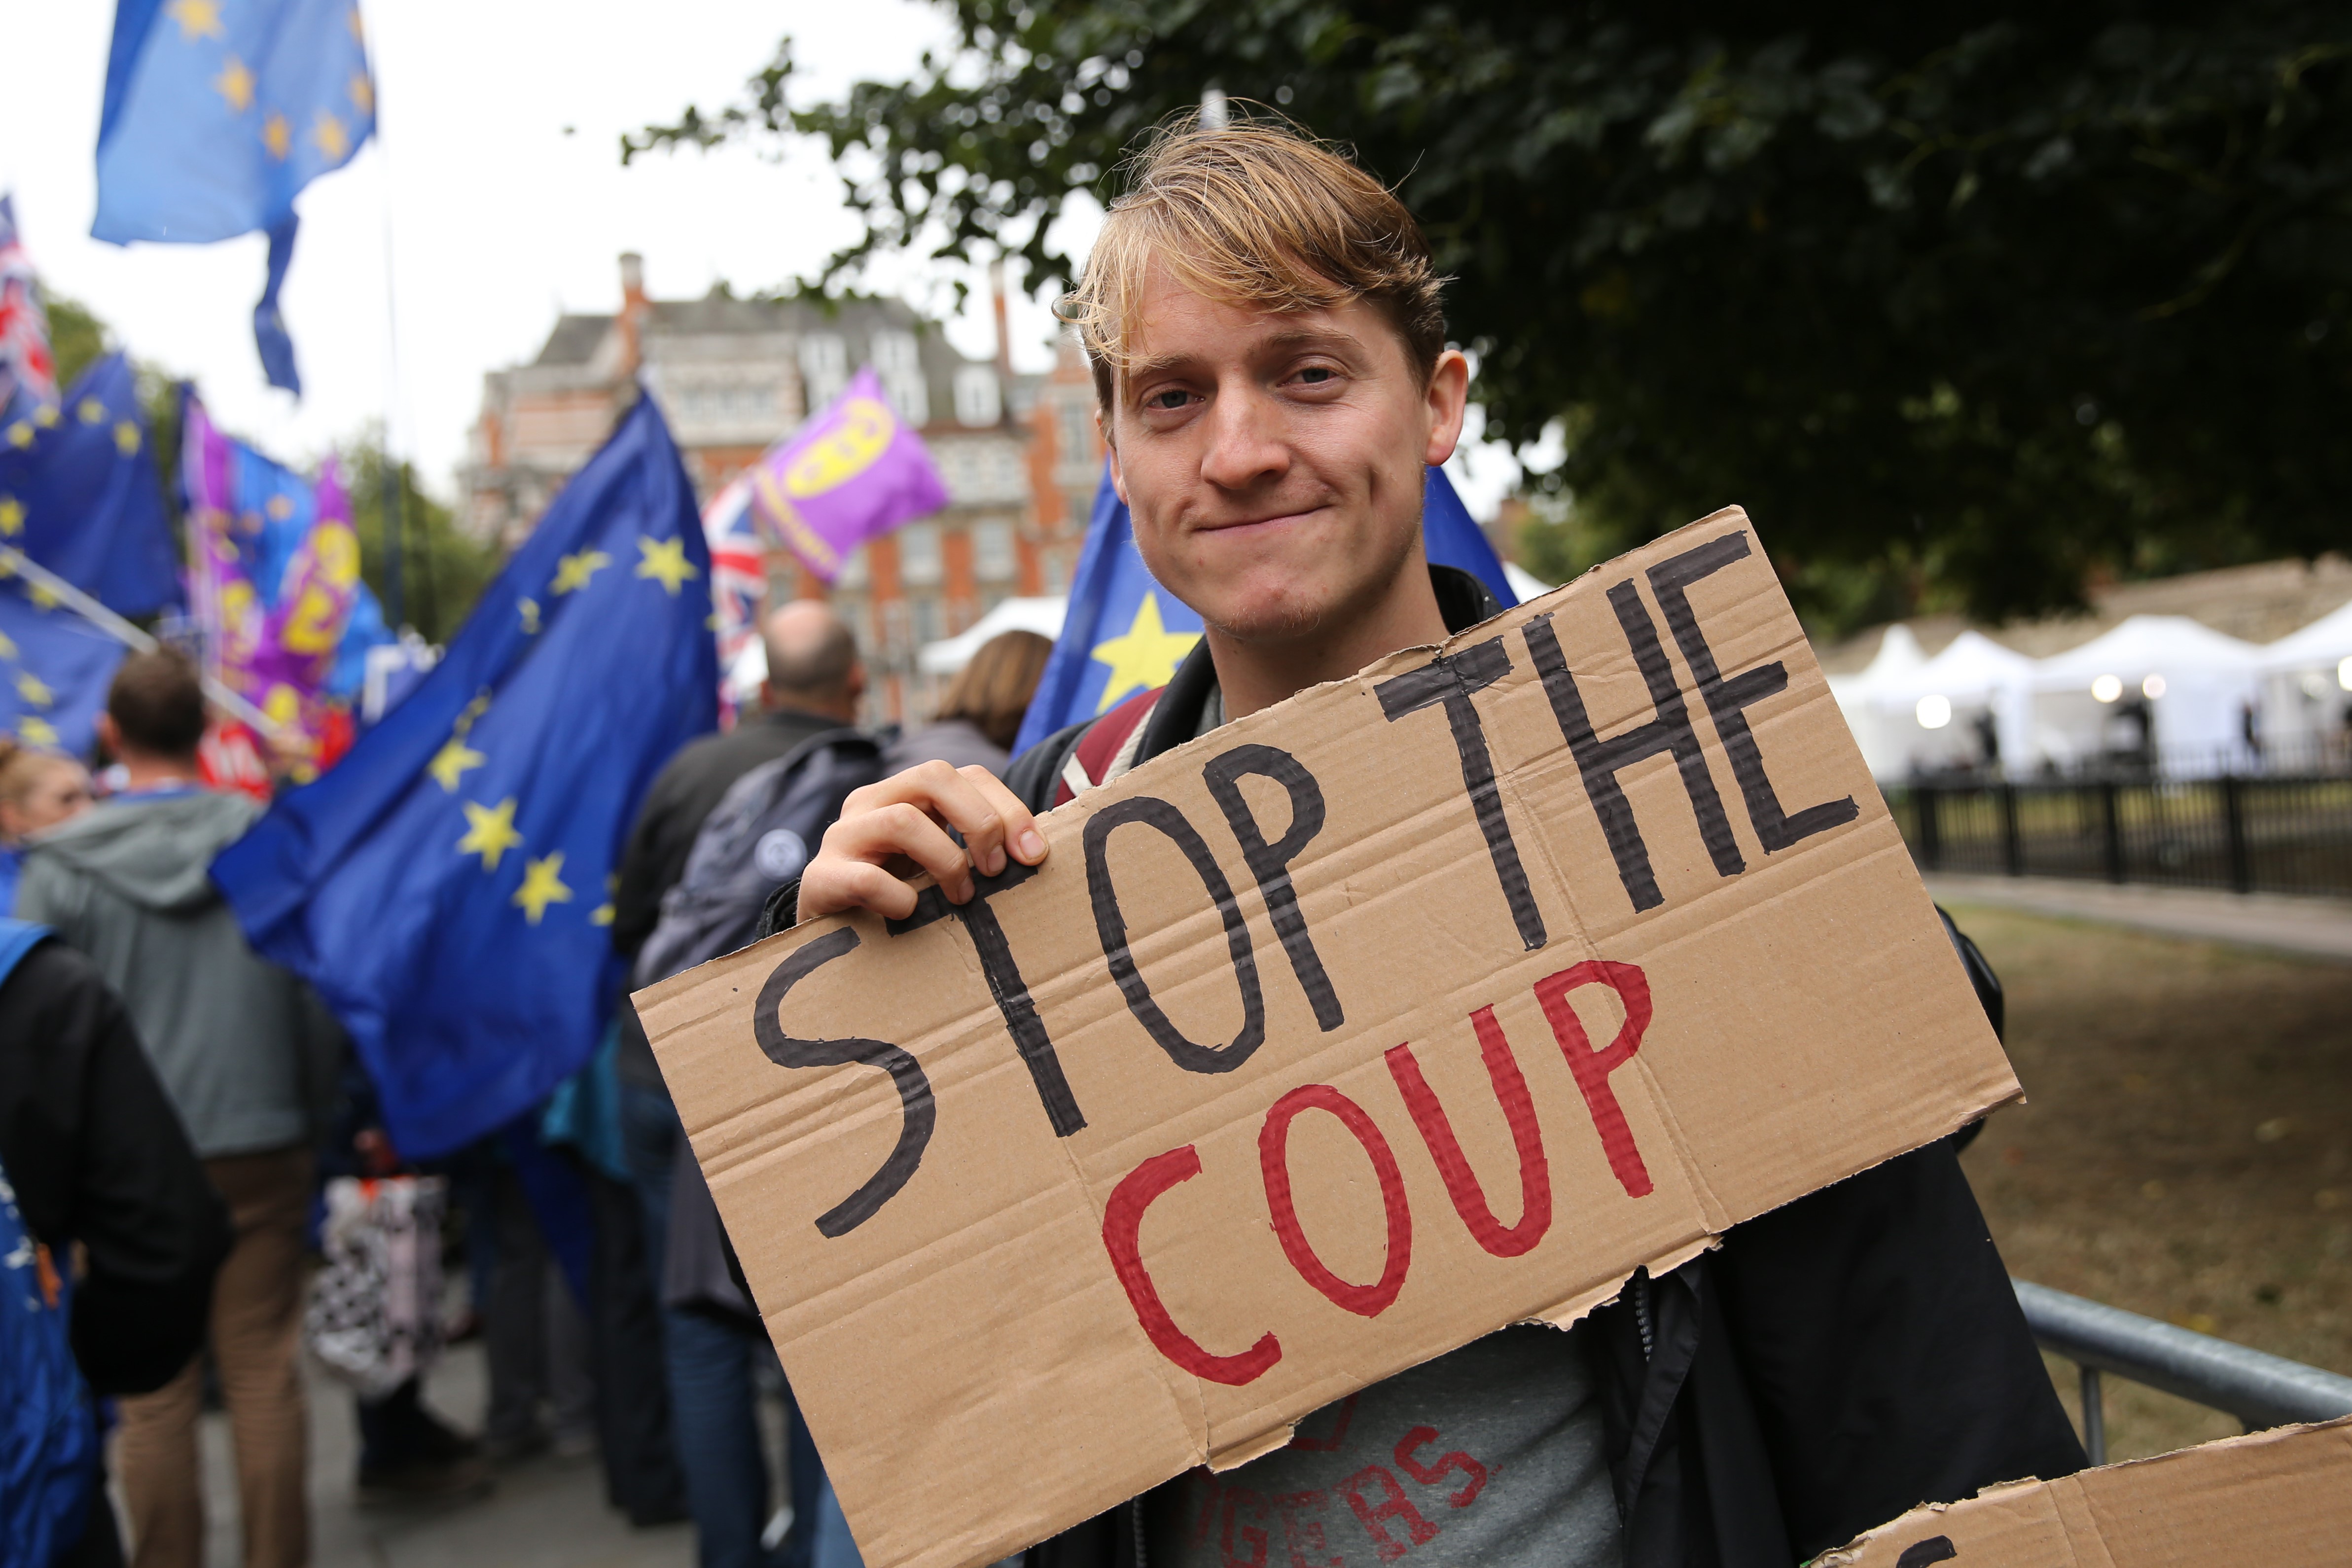 Anti-Brexit protesters stand protest outside the Houses of Parliament in London on September 9, 2019